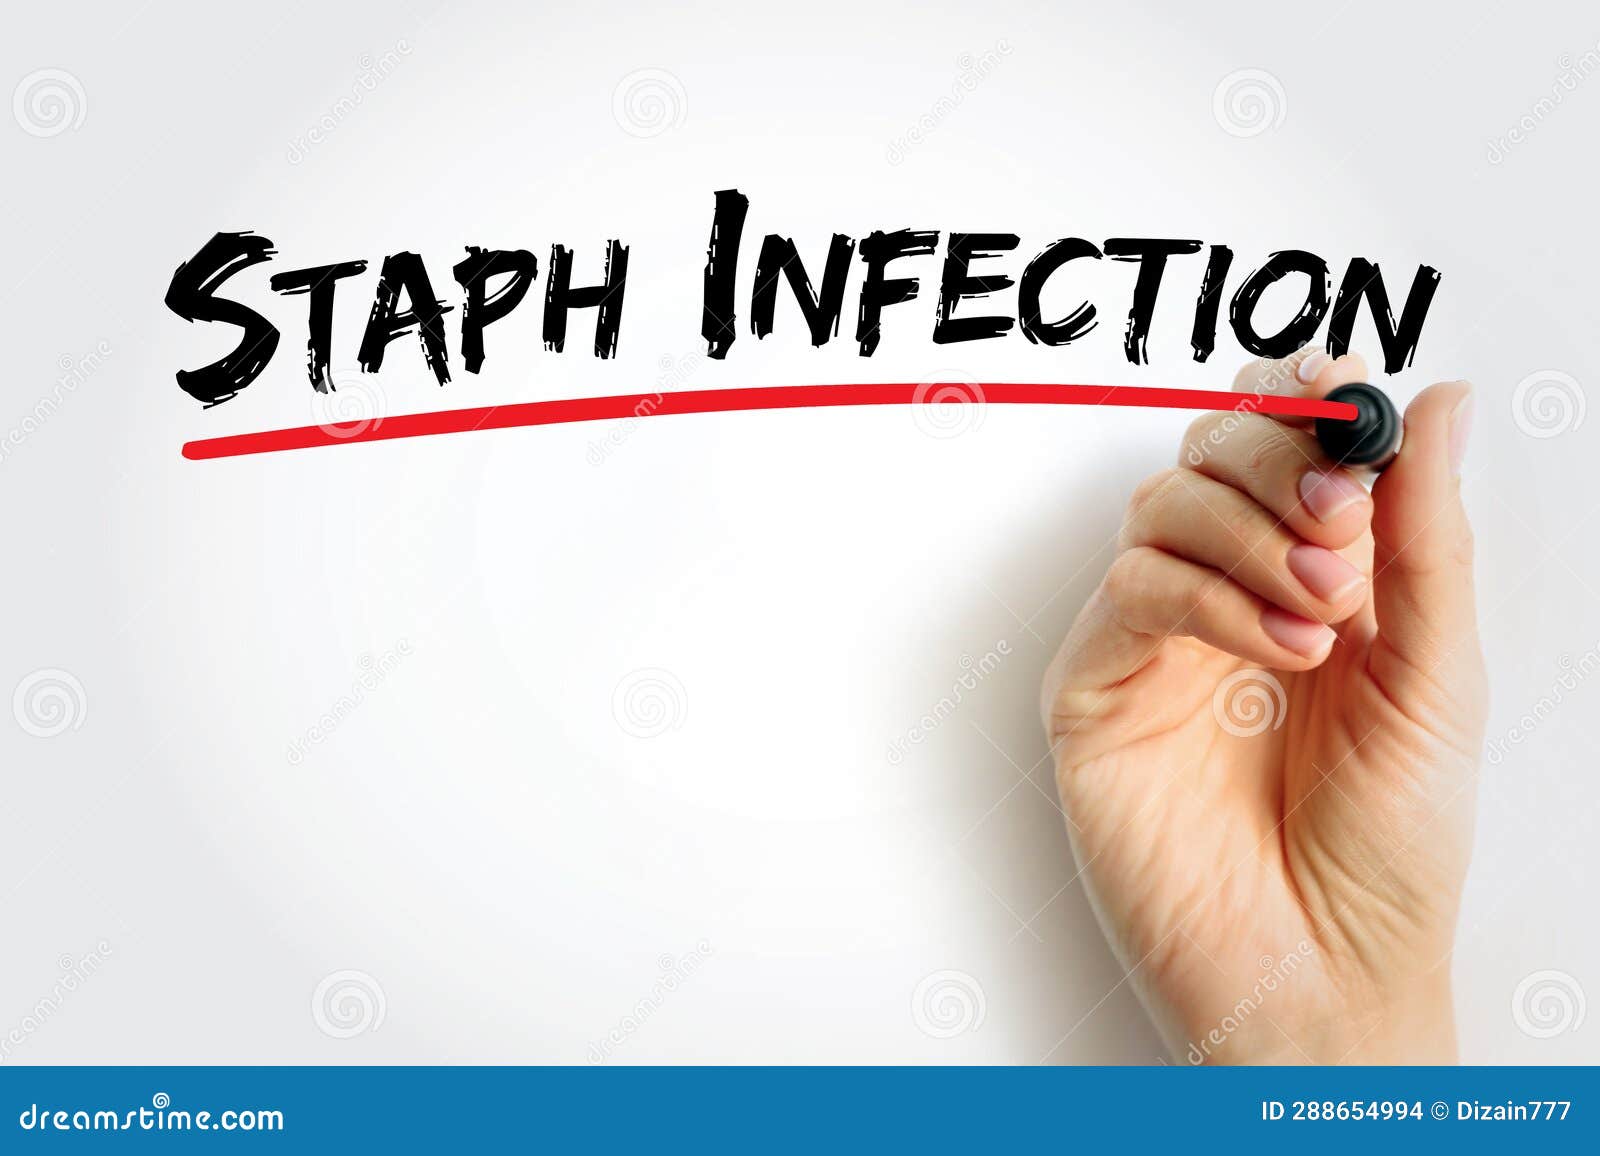 Golden staph: It's there and it's on you! | Sally's Story — Users News (UN)